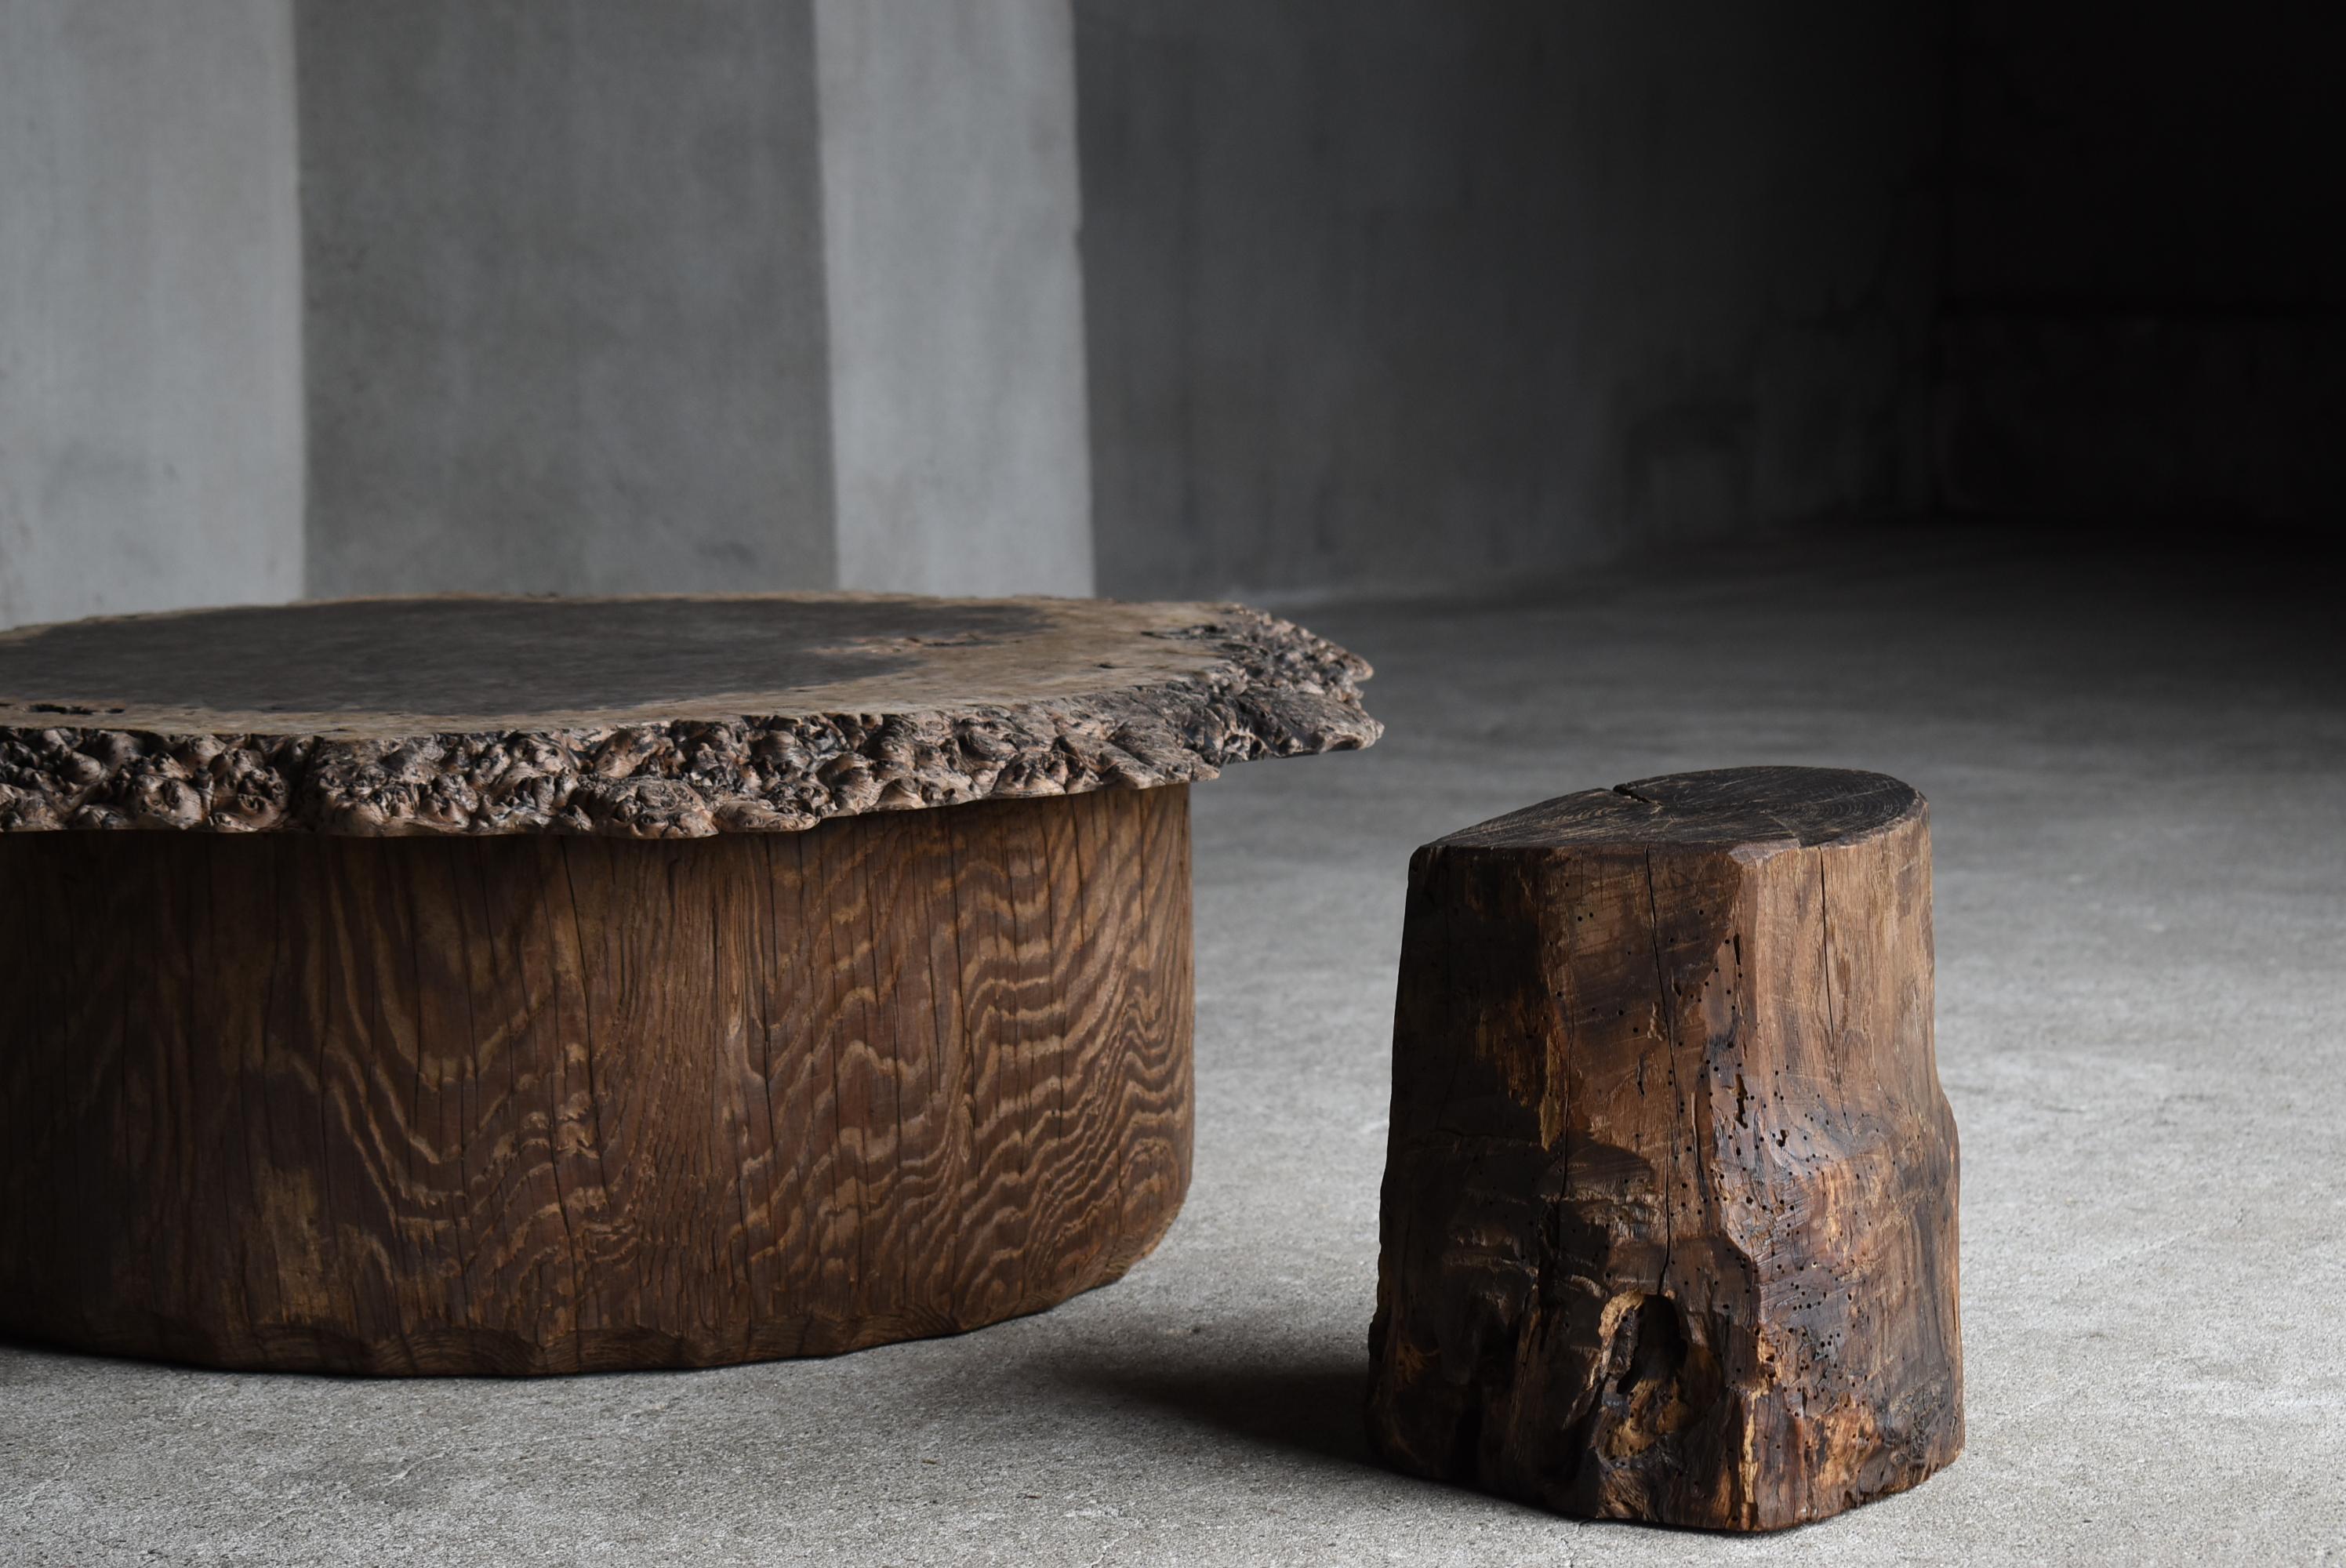 This is a very old primitive style stool made in Japan.
It was made during the Meiji period (1860s-1900s).
It is carved from chestnut wood.

It was used as a working chair by farmers.
It is rustic, simple and beautiful.

There are some insect bite